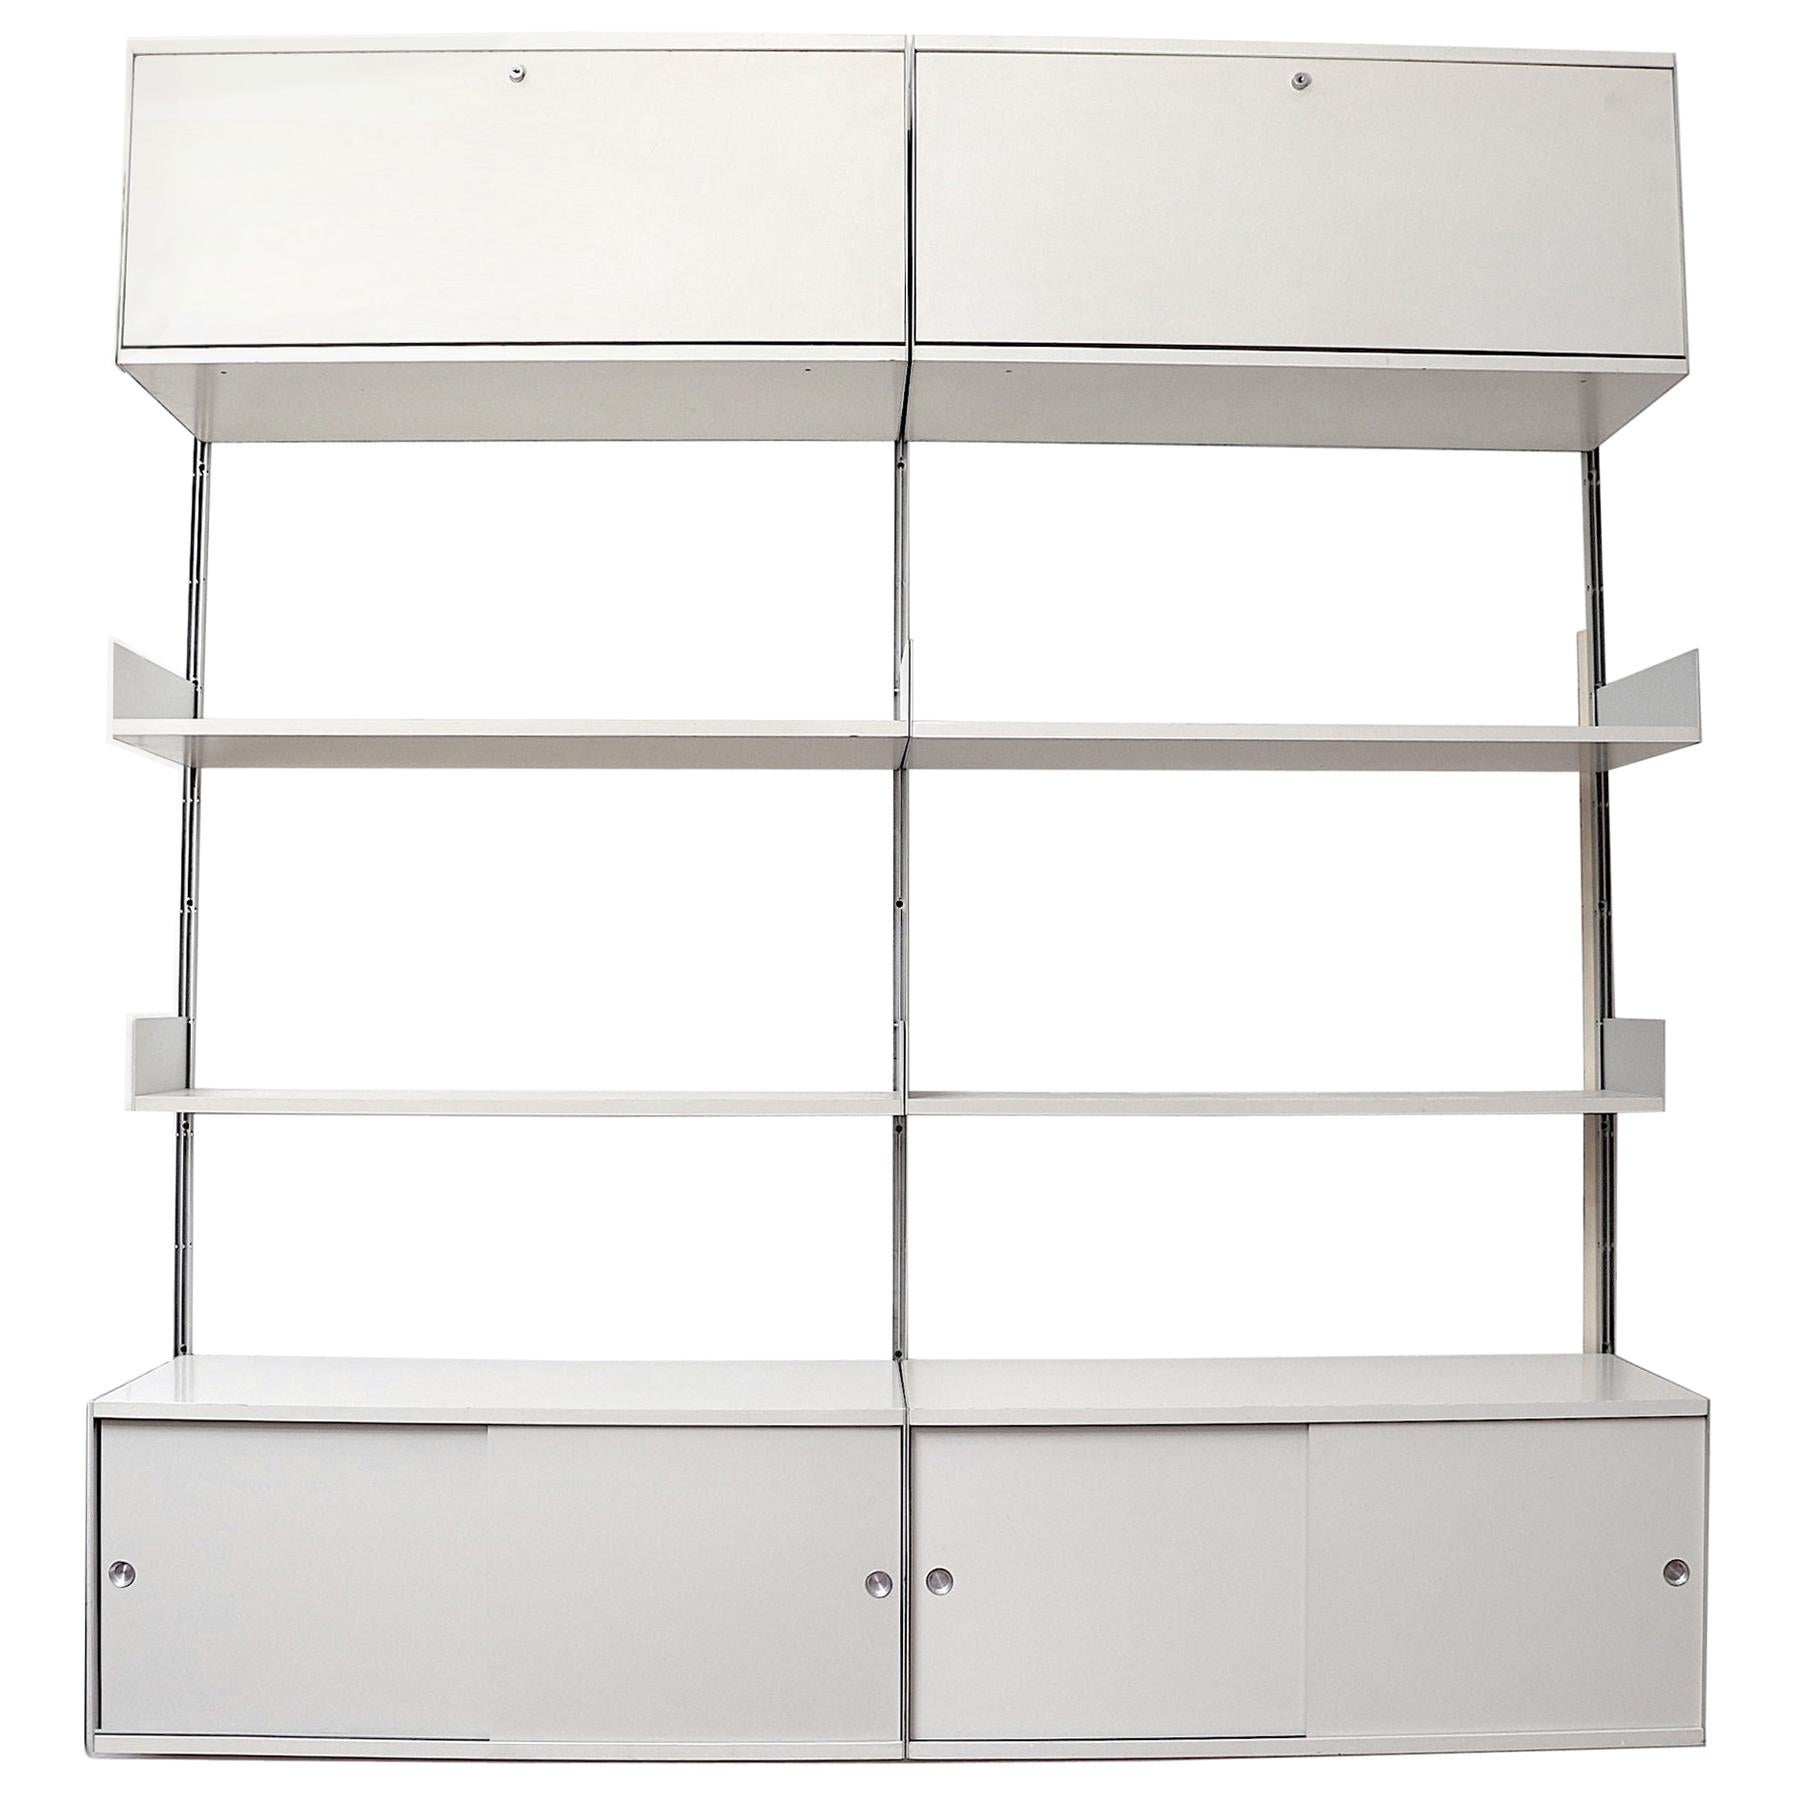 Dieter Rams 606 Two Section Shelving Unit For Vitsoe At 1stdibs